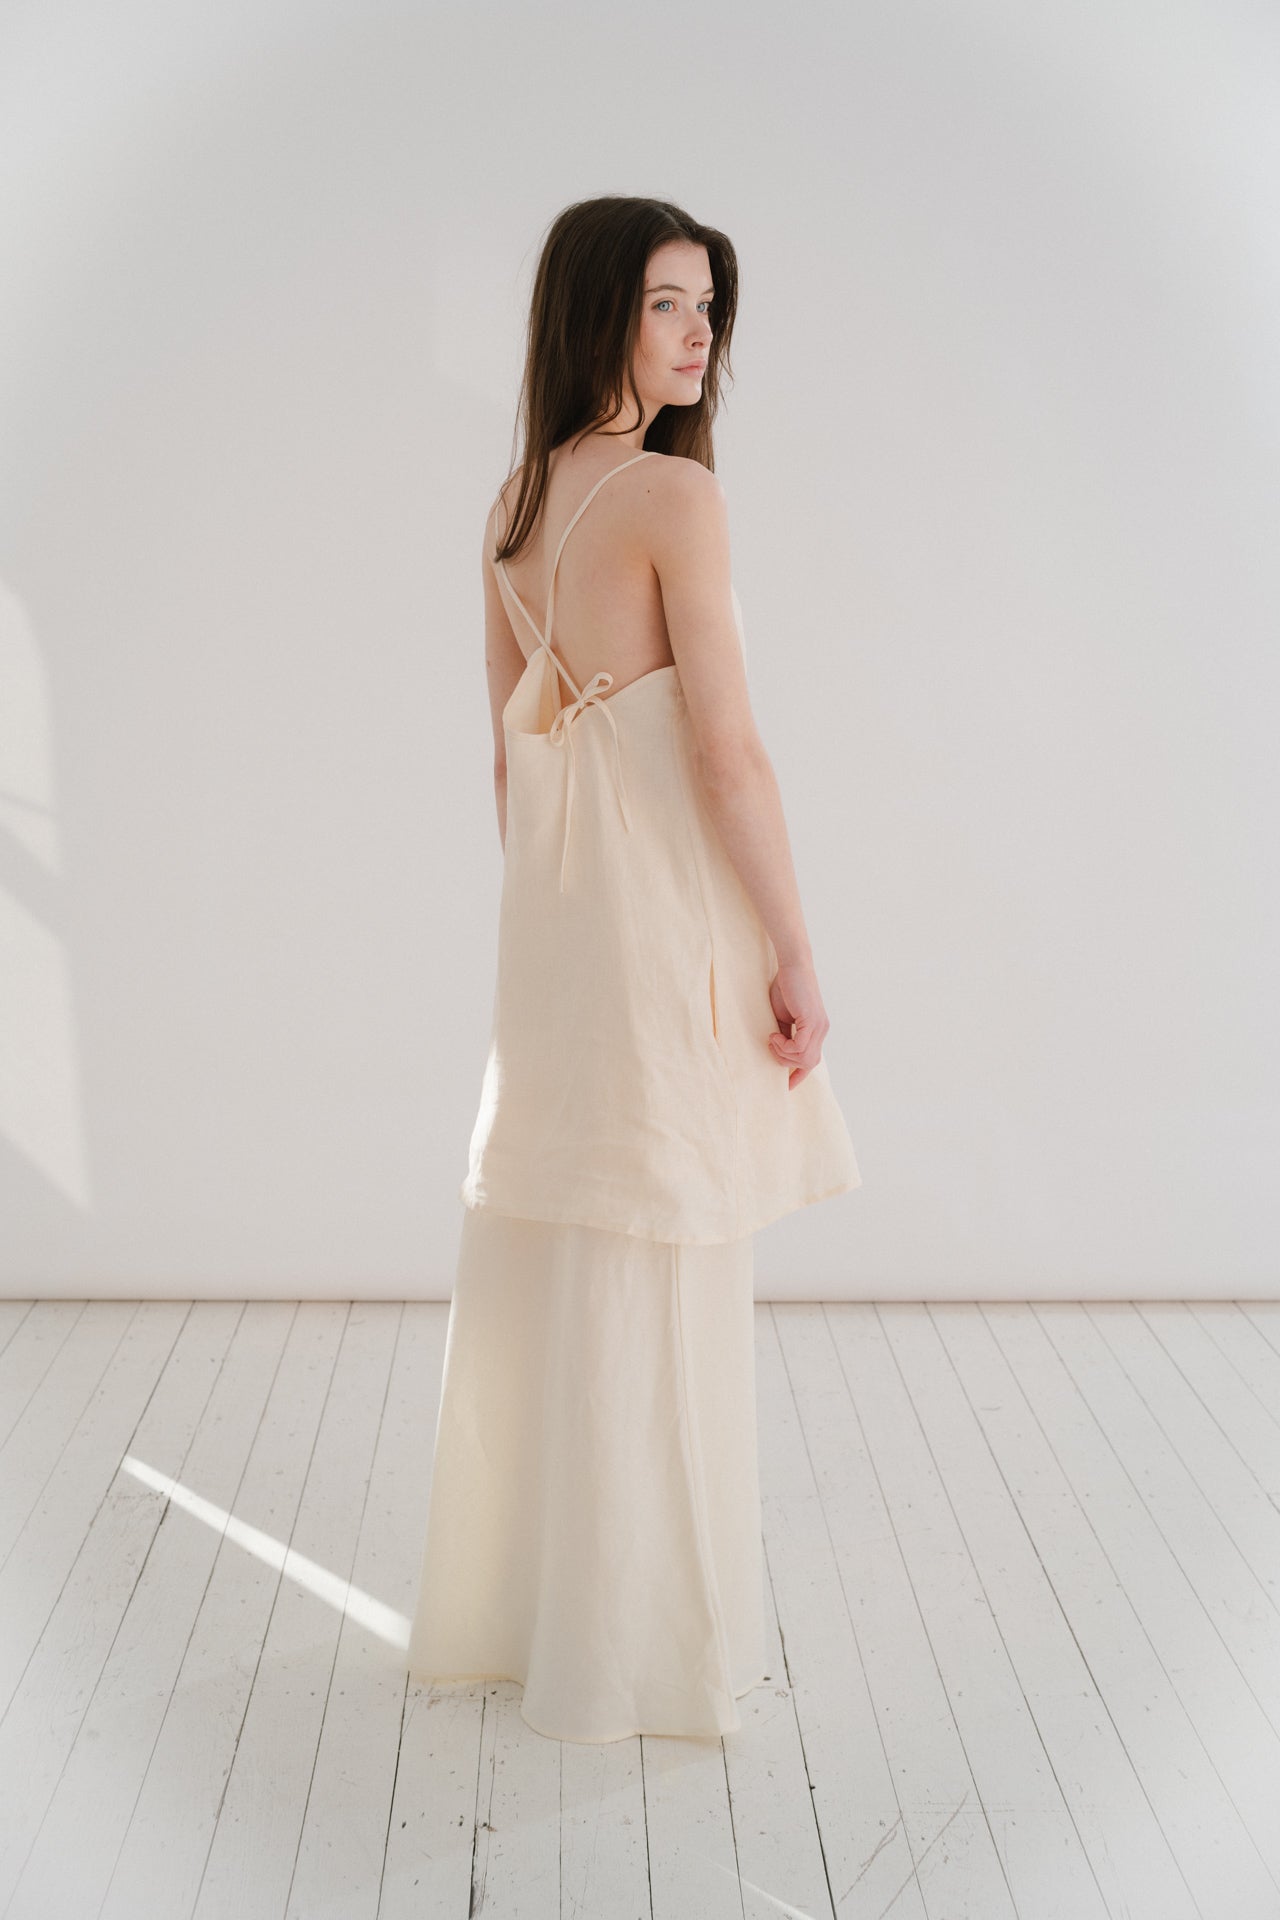 THE ELLA MINI | THE ELLA MINI A new shape for us for SS24, the Ella mini is one of our most simple and paired back silhouettes to date. She features a simple square neckline that cowls slightly. The delicate straps crossover each other at the back and att